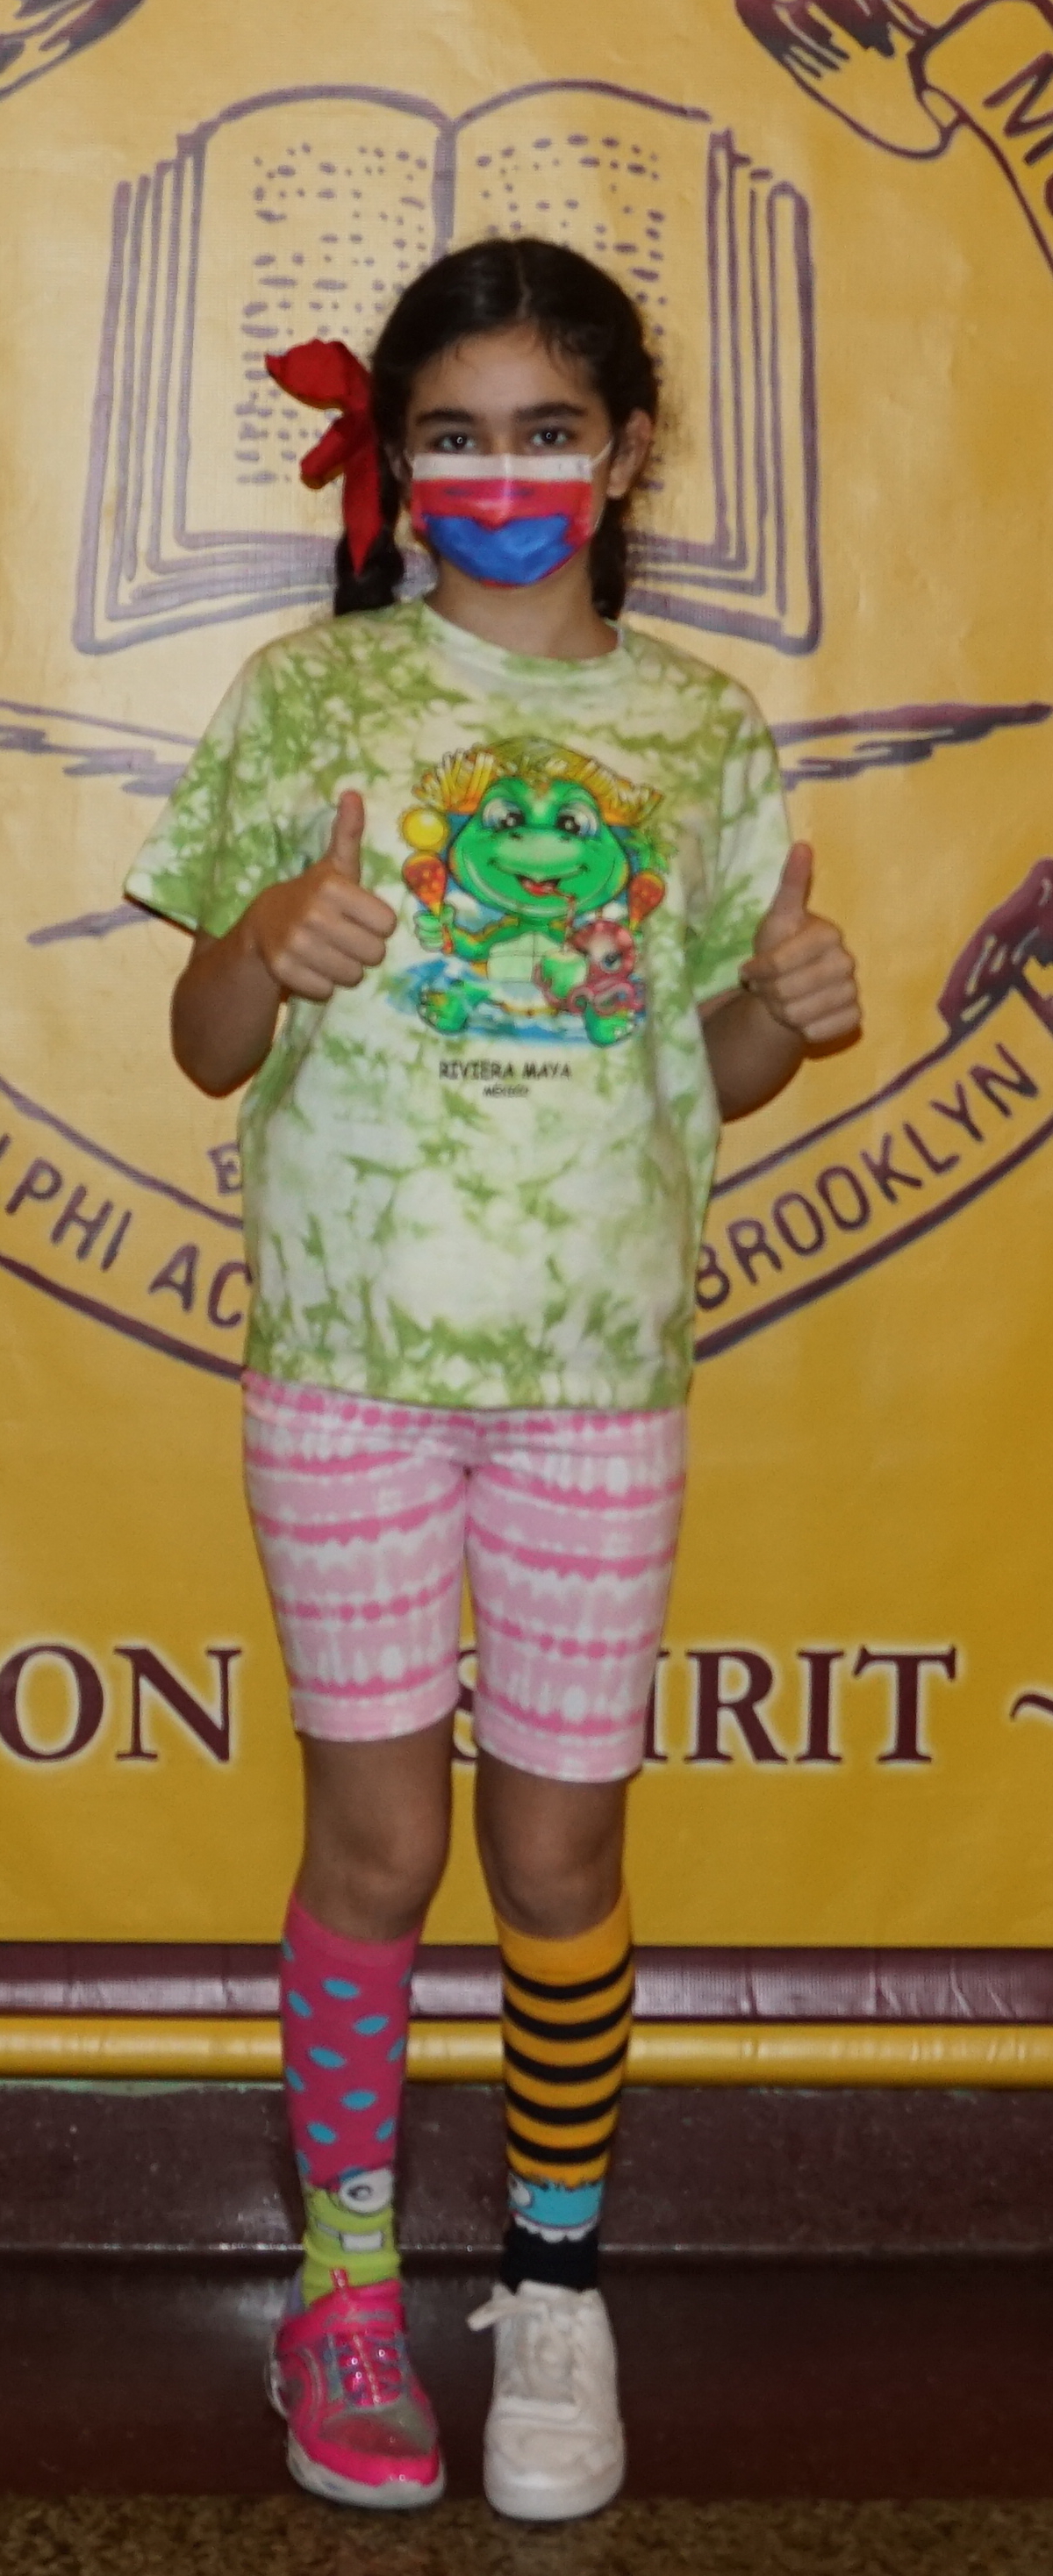 Middle Schooler Emma shows off her awesomely mismatched outfit!